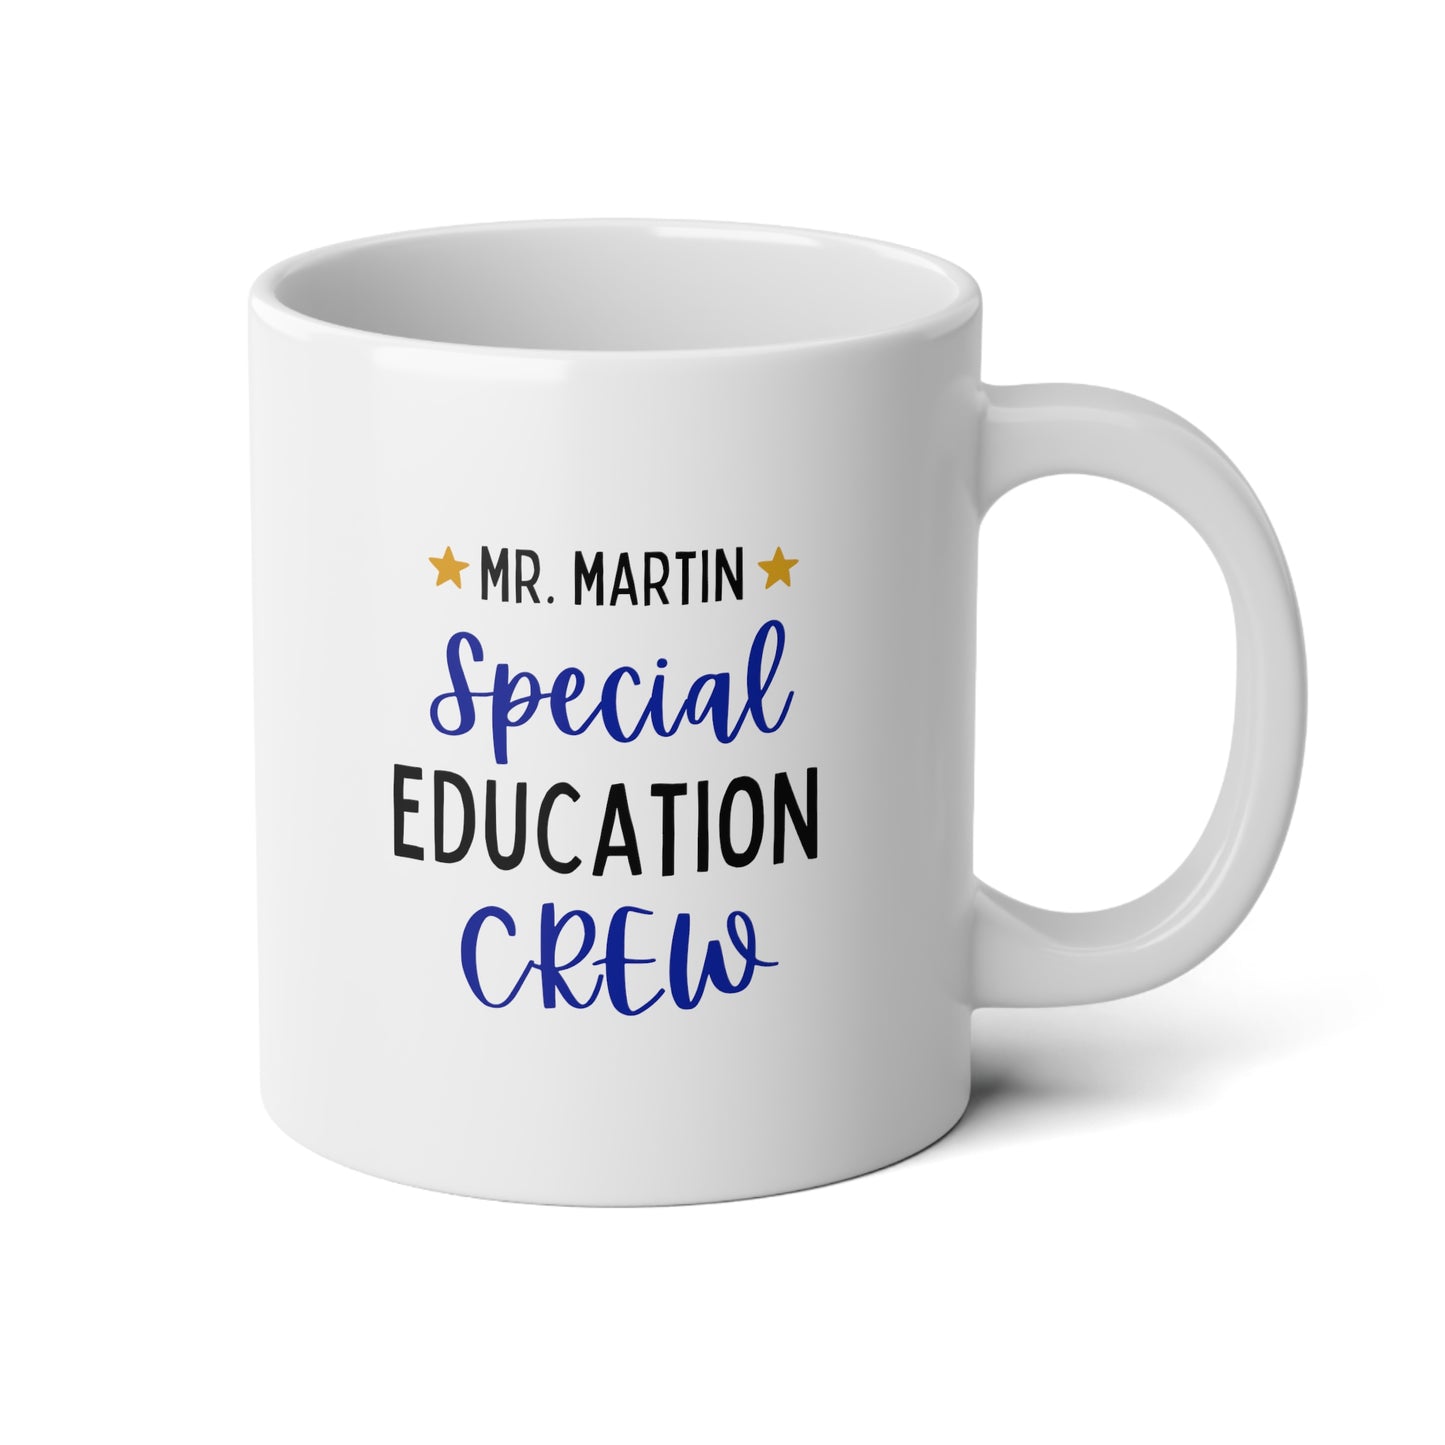 Special Education Crew 20oz white funny large coffee mug gift for teacher SPED  custom personalized customize name waveywares wavey wares wavywares wavy wares